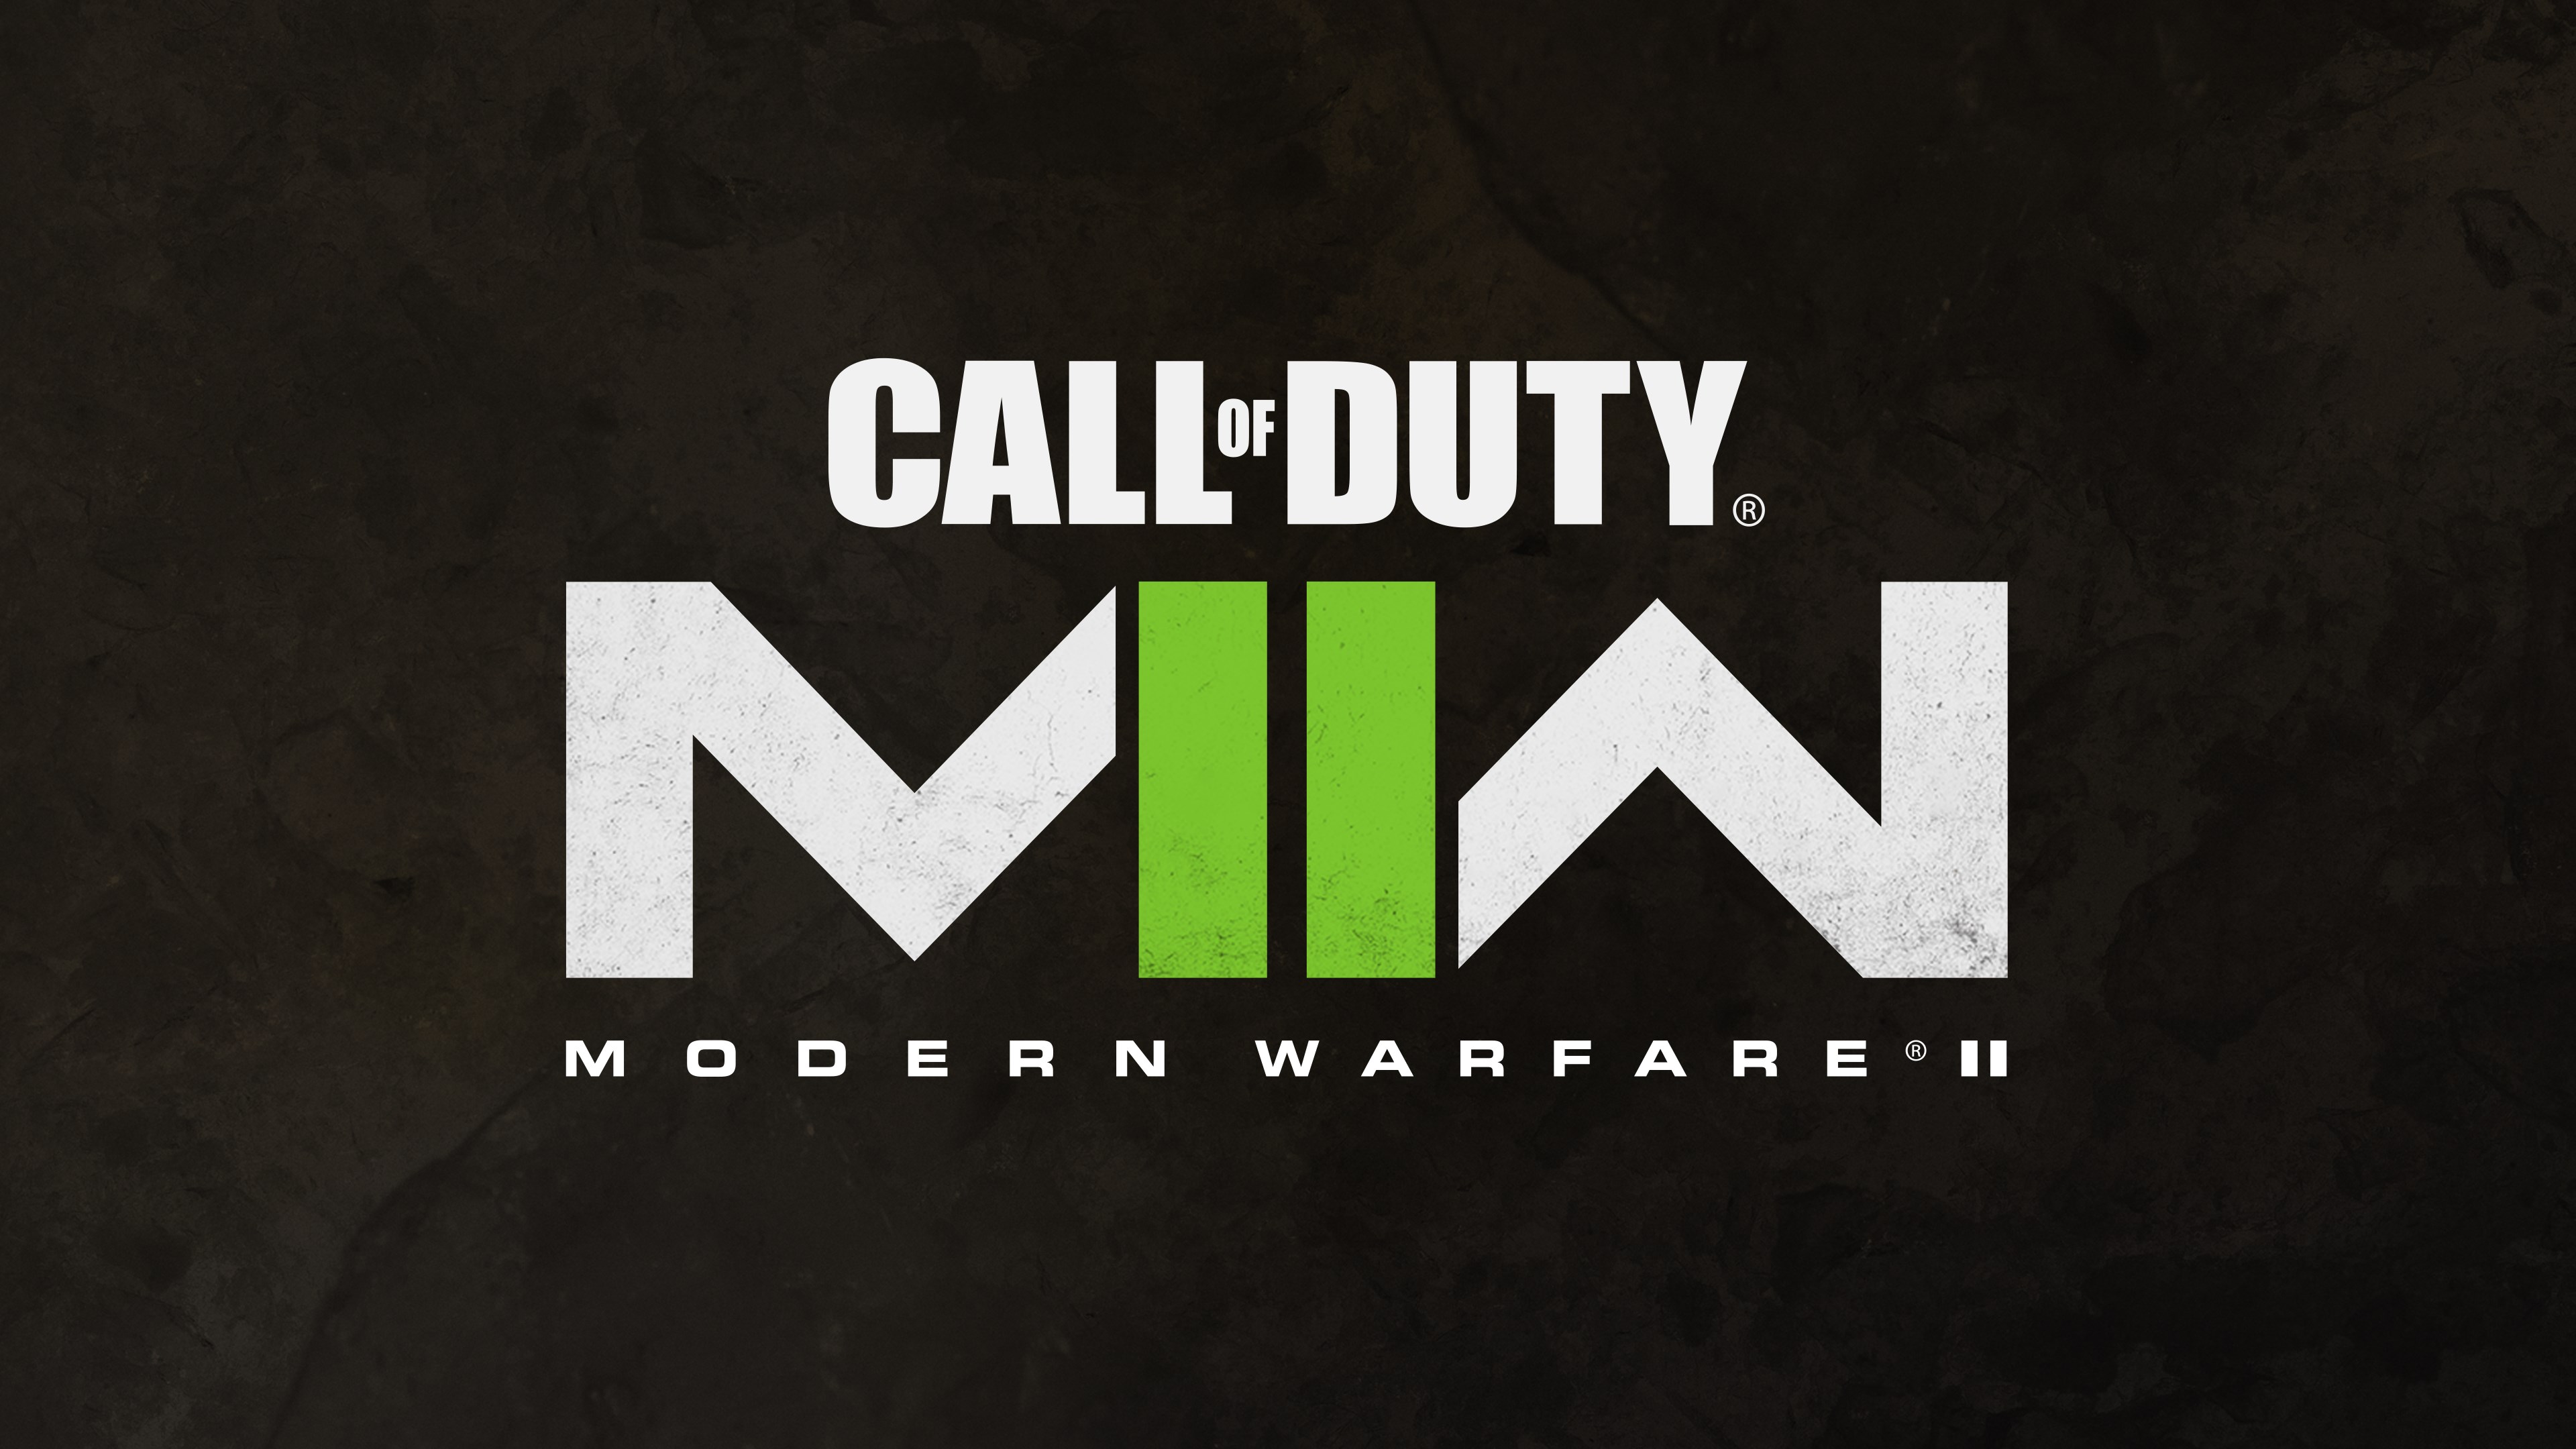 Call Of Duty Modern Warfare Ii Is Now Available For Digital Pre Order And Pre Download On Xbox 